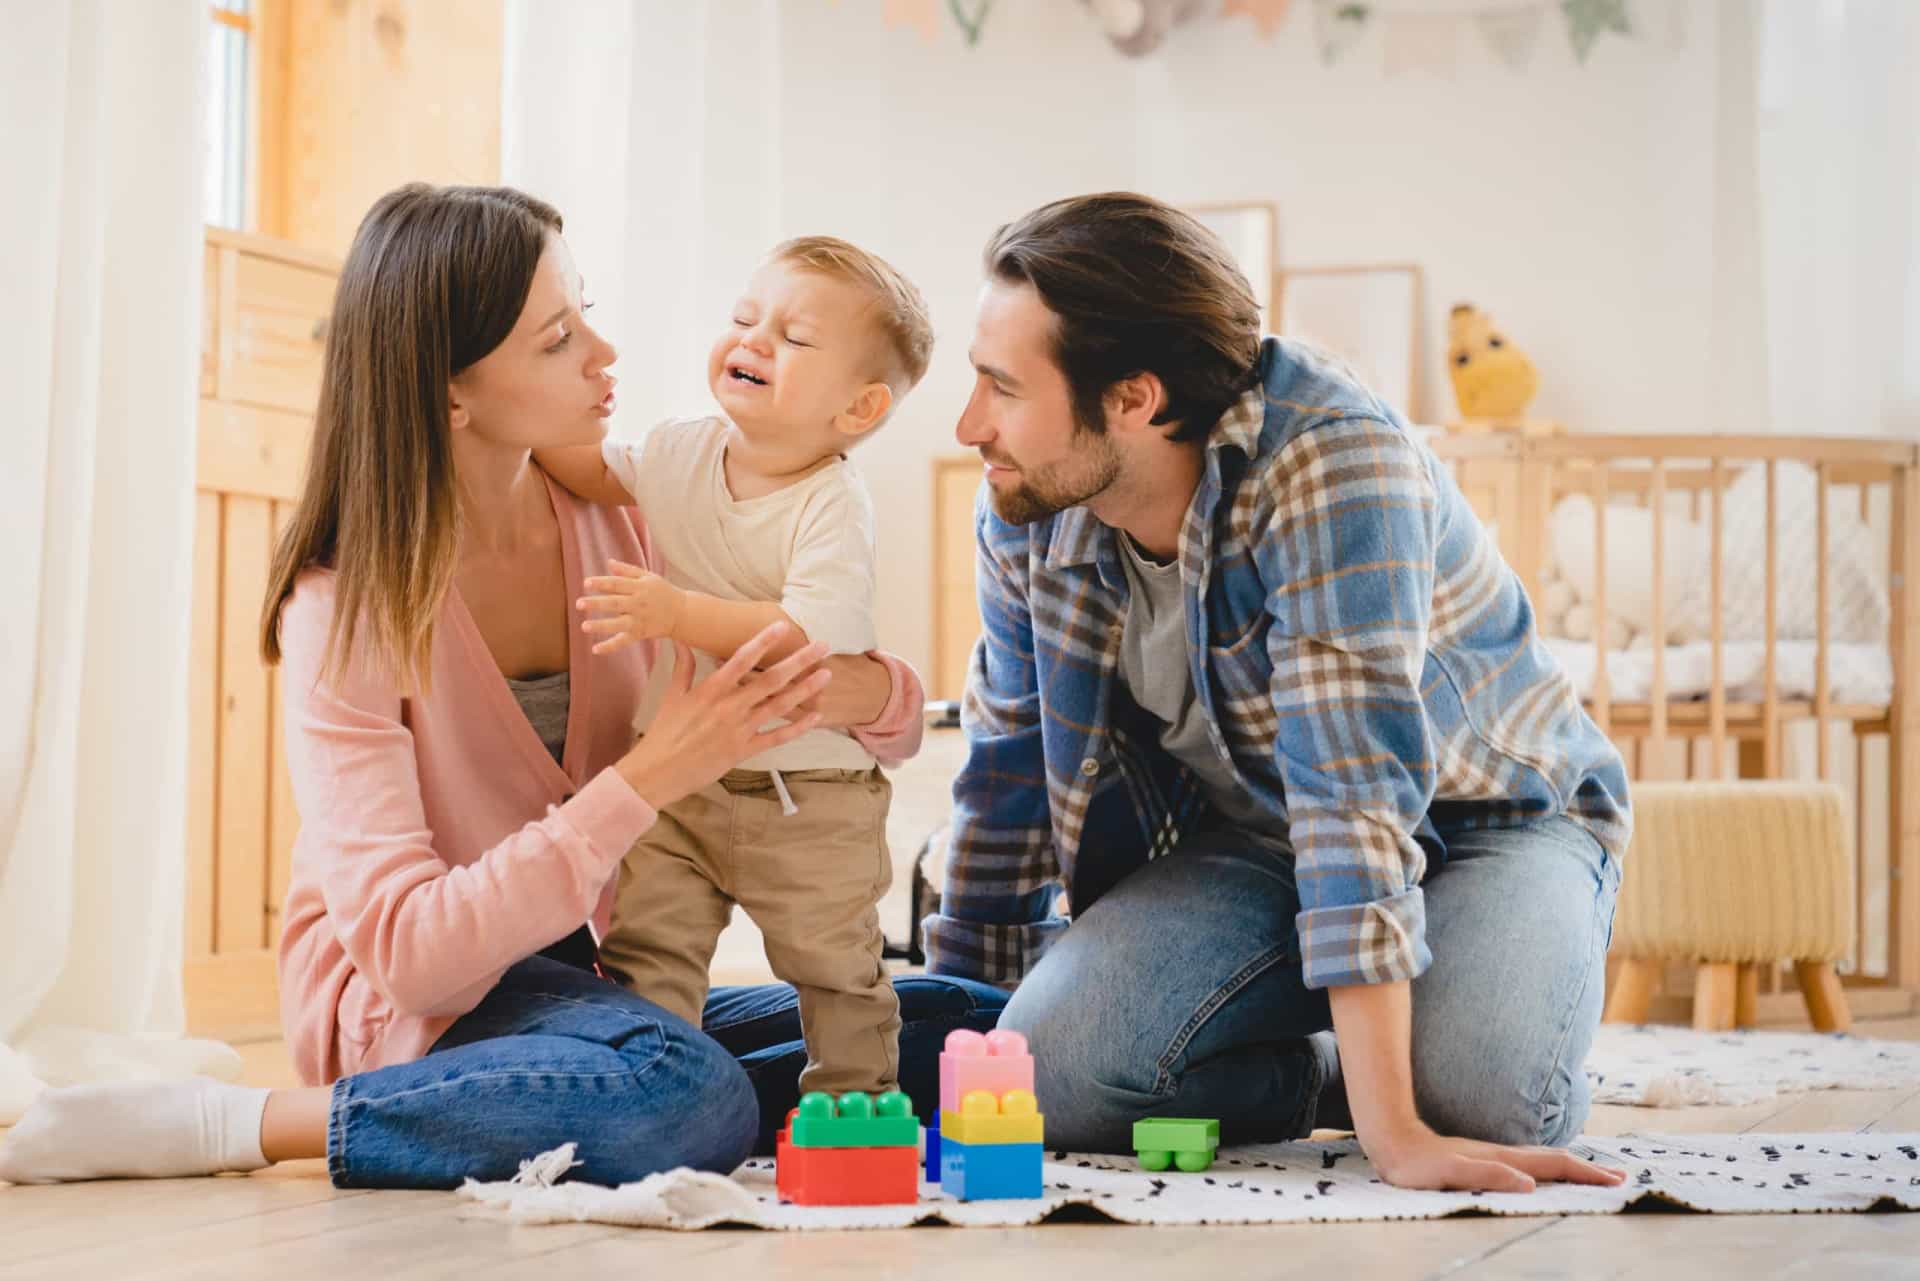 <p>Children require a lot of attention and effort. This can cause a strain on the relationship, especially when partners disagree on how to raise them. Talk to your partner about why they think something should be done differently, and share your opinion. This will help you understand each other. </p><p><a href="https://www.msn.com/en-us/community/channel/vid-7xx8mnucu55yw63we9va2gwr7uihbxwc68fxqp25x6tg4ftibpra?cvid=94631541bc0f4f89bfd59158d696ad7e">Follow us and access great exclusive content everyday</a></p>